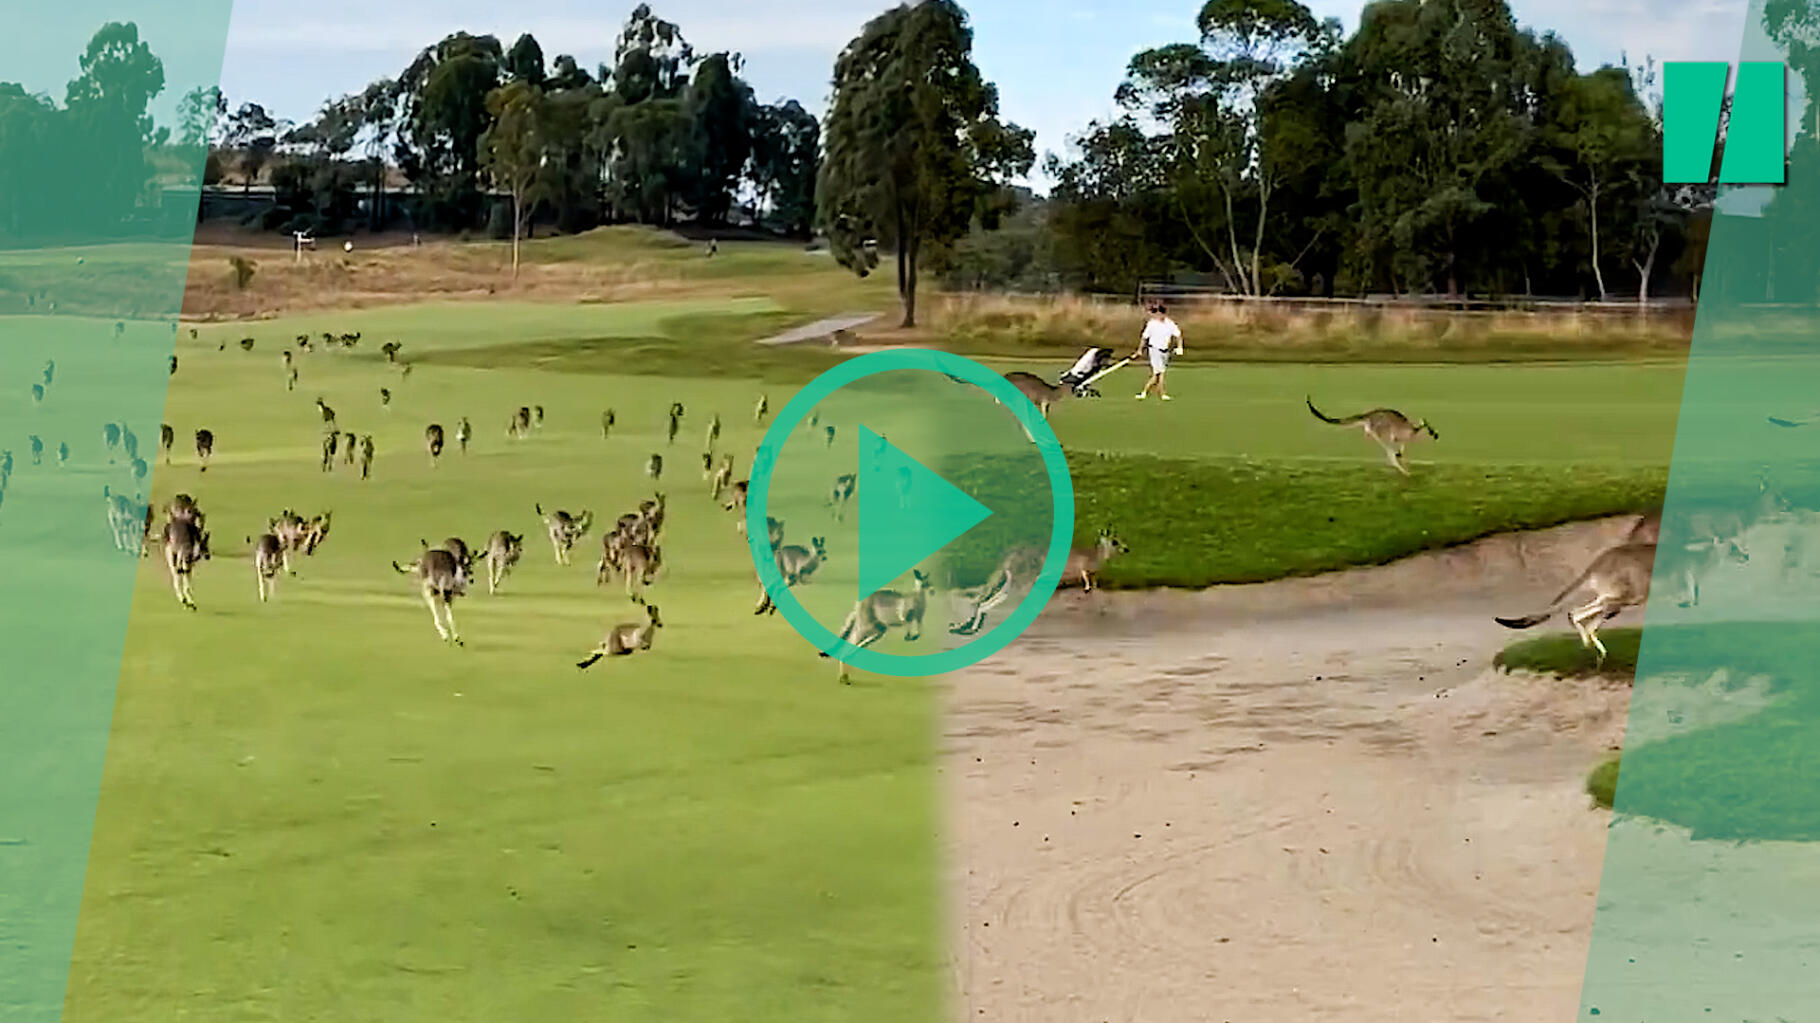 In Australia, an impressive herd of kangaroos invades a golf course